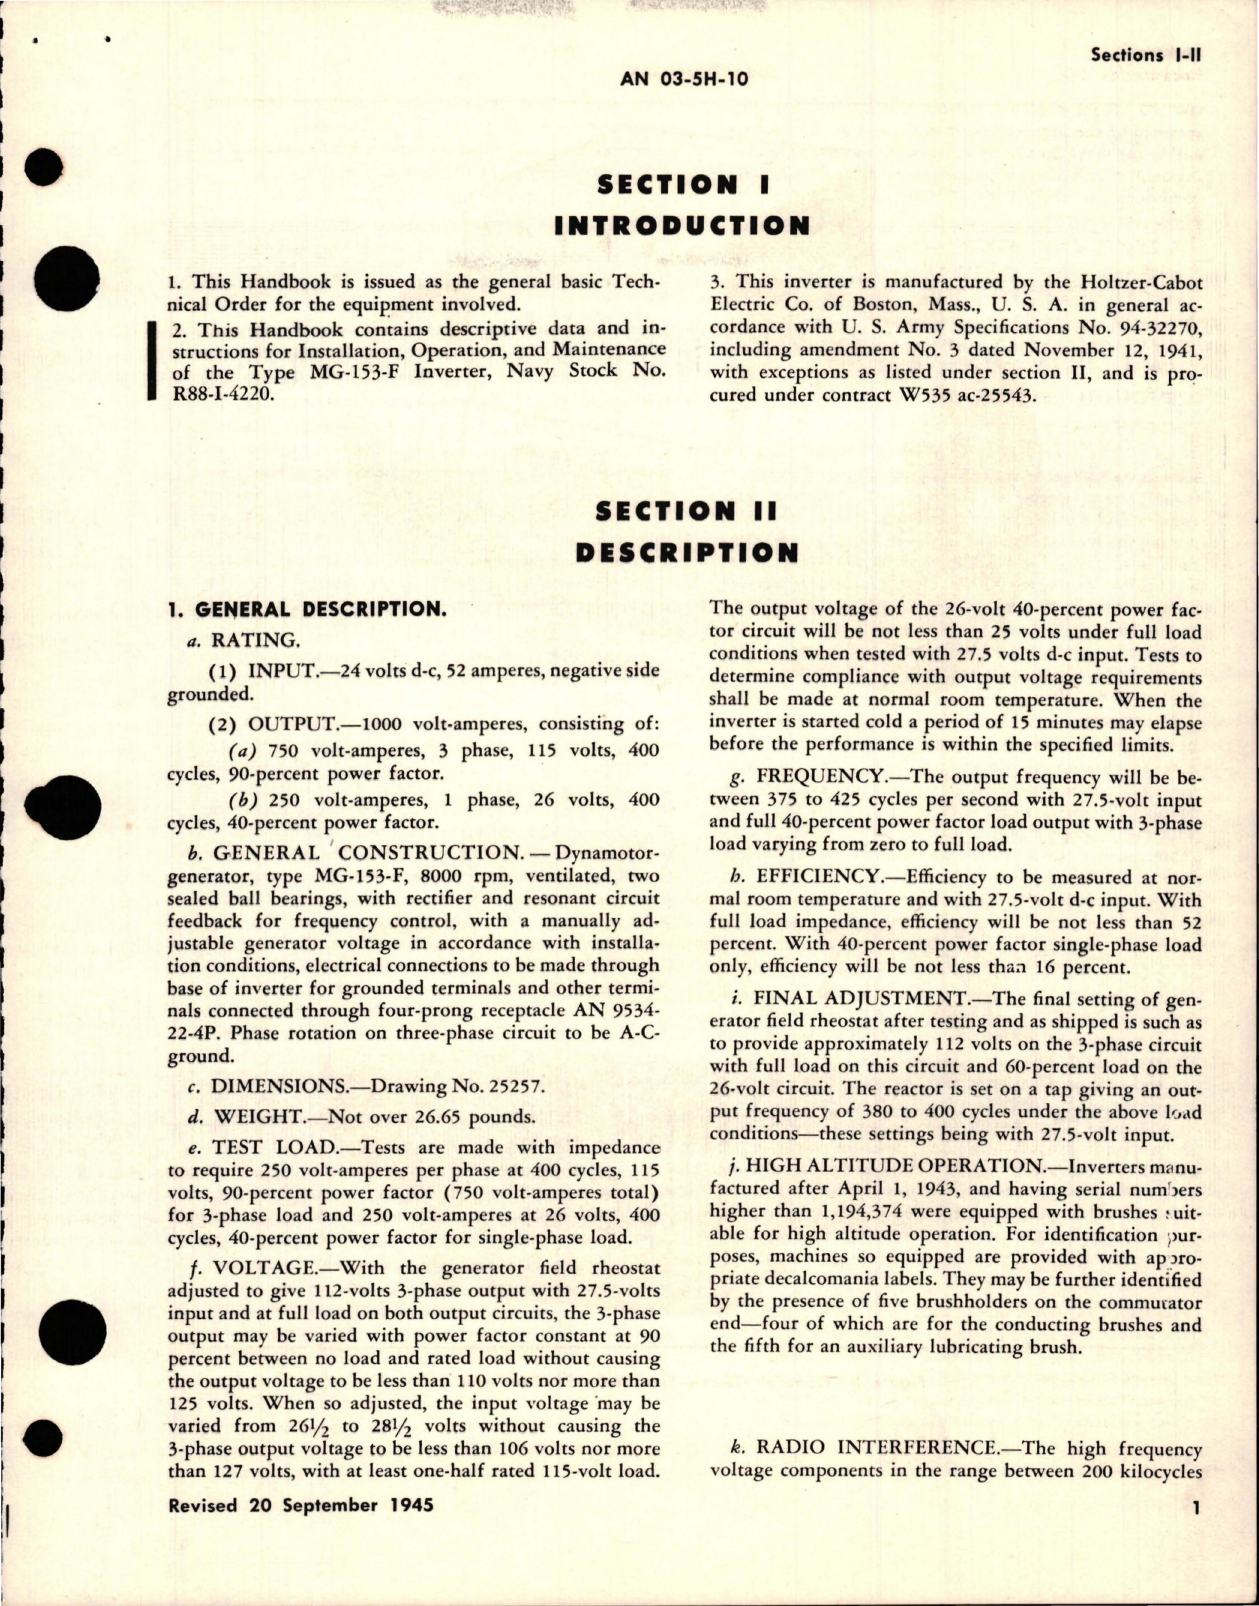 Sample page 5 from AirCorps Library document: Operation, Service & Overhaul Instructions with Parts Catalog for Inverter - Type MG-153F 